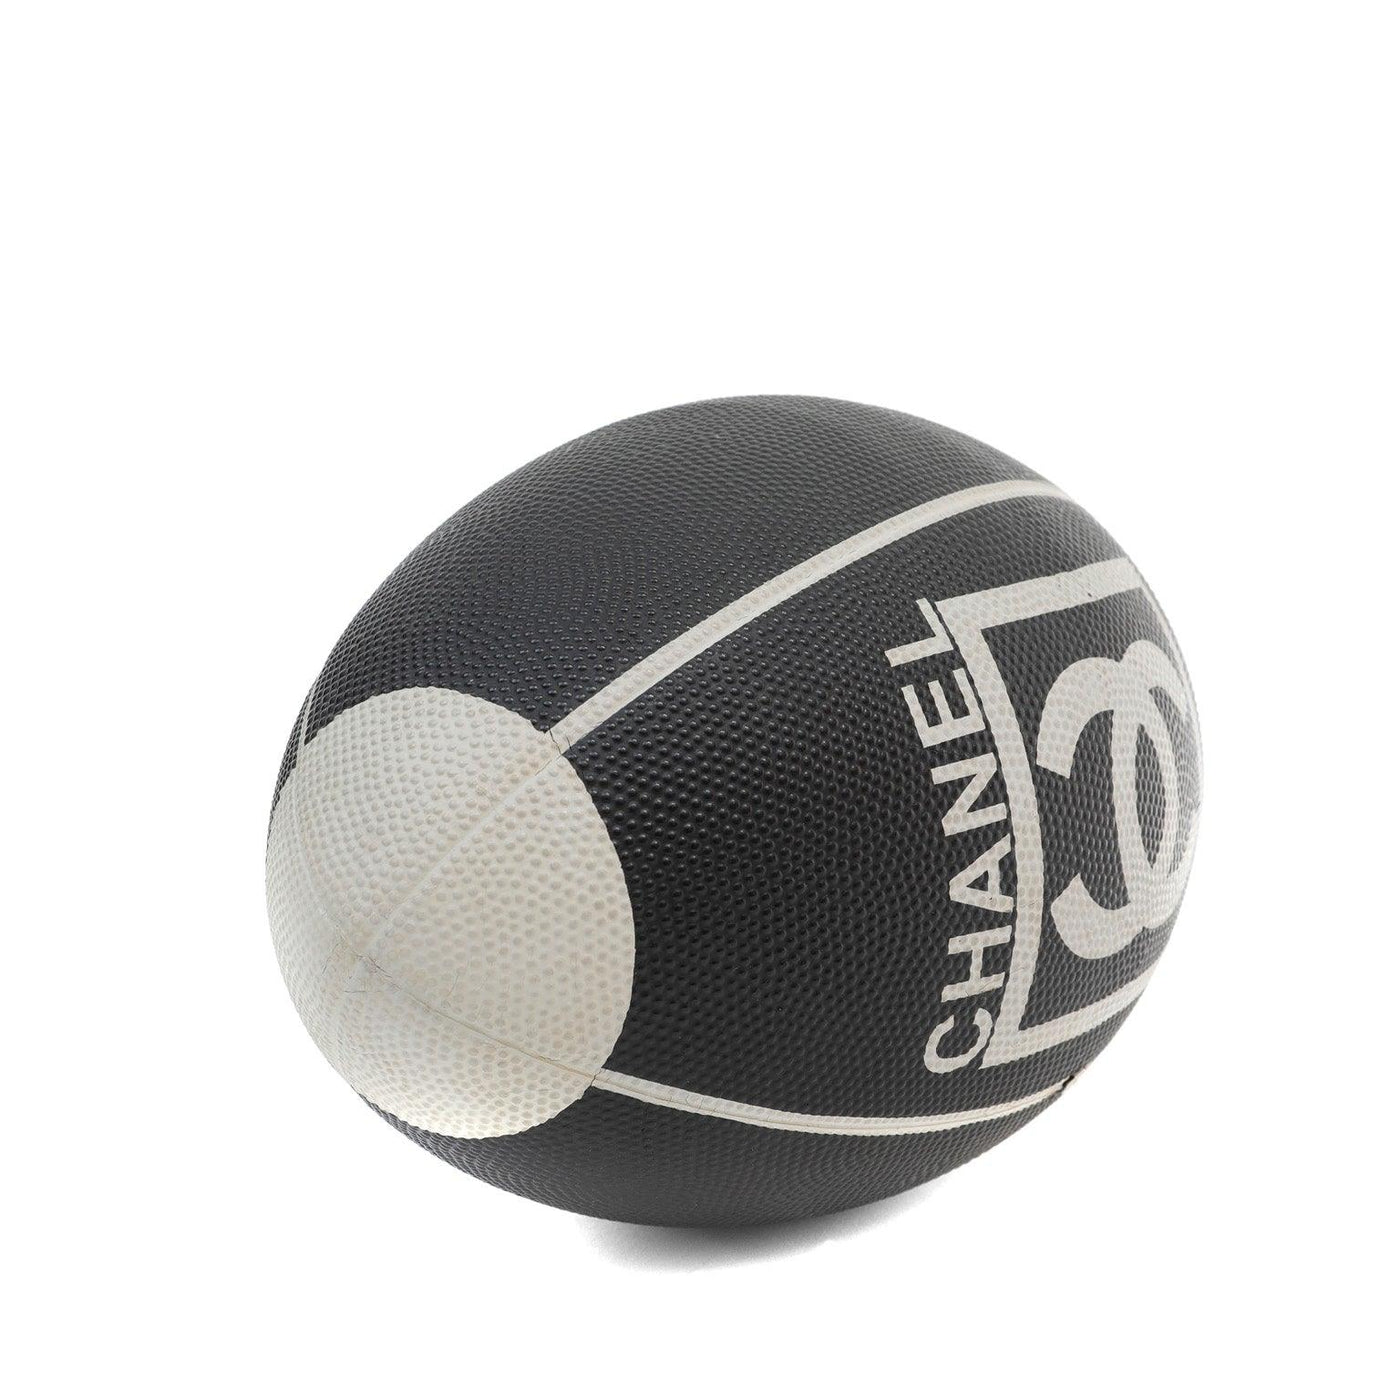 Chanel Black and White Game Series Rugby Football - Only Authentics